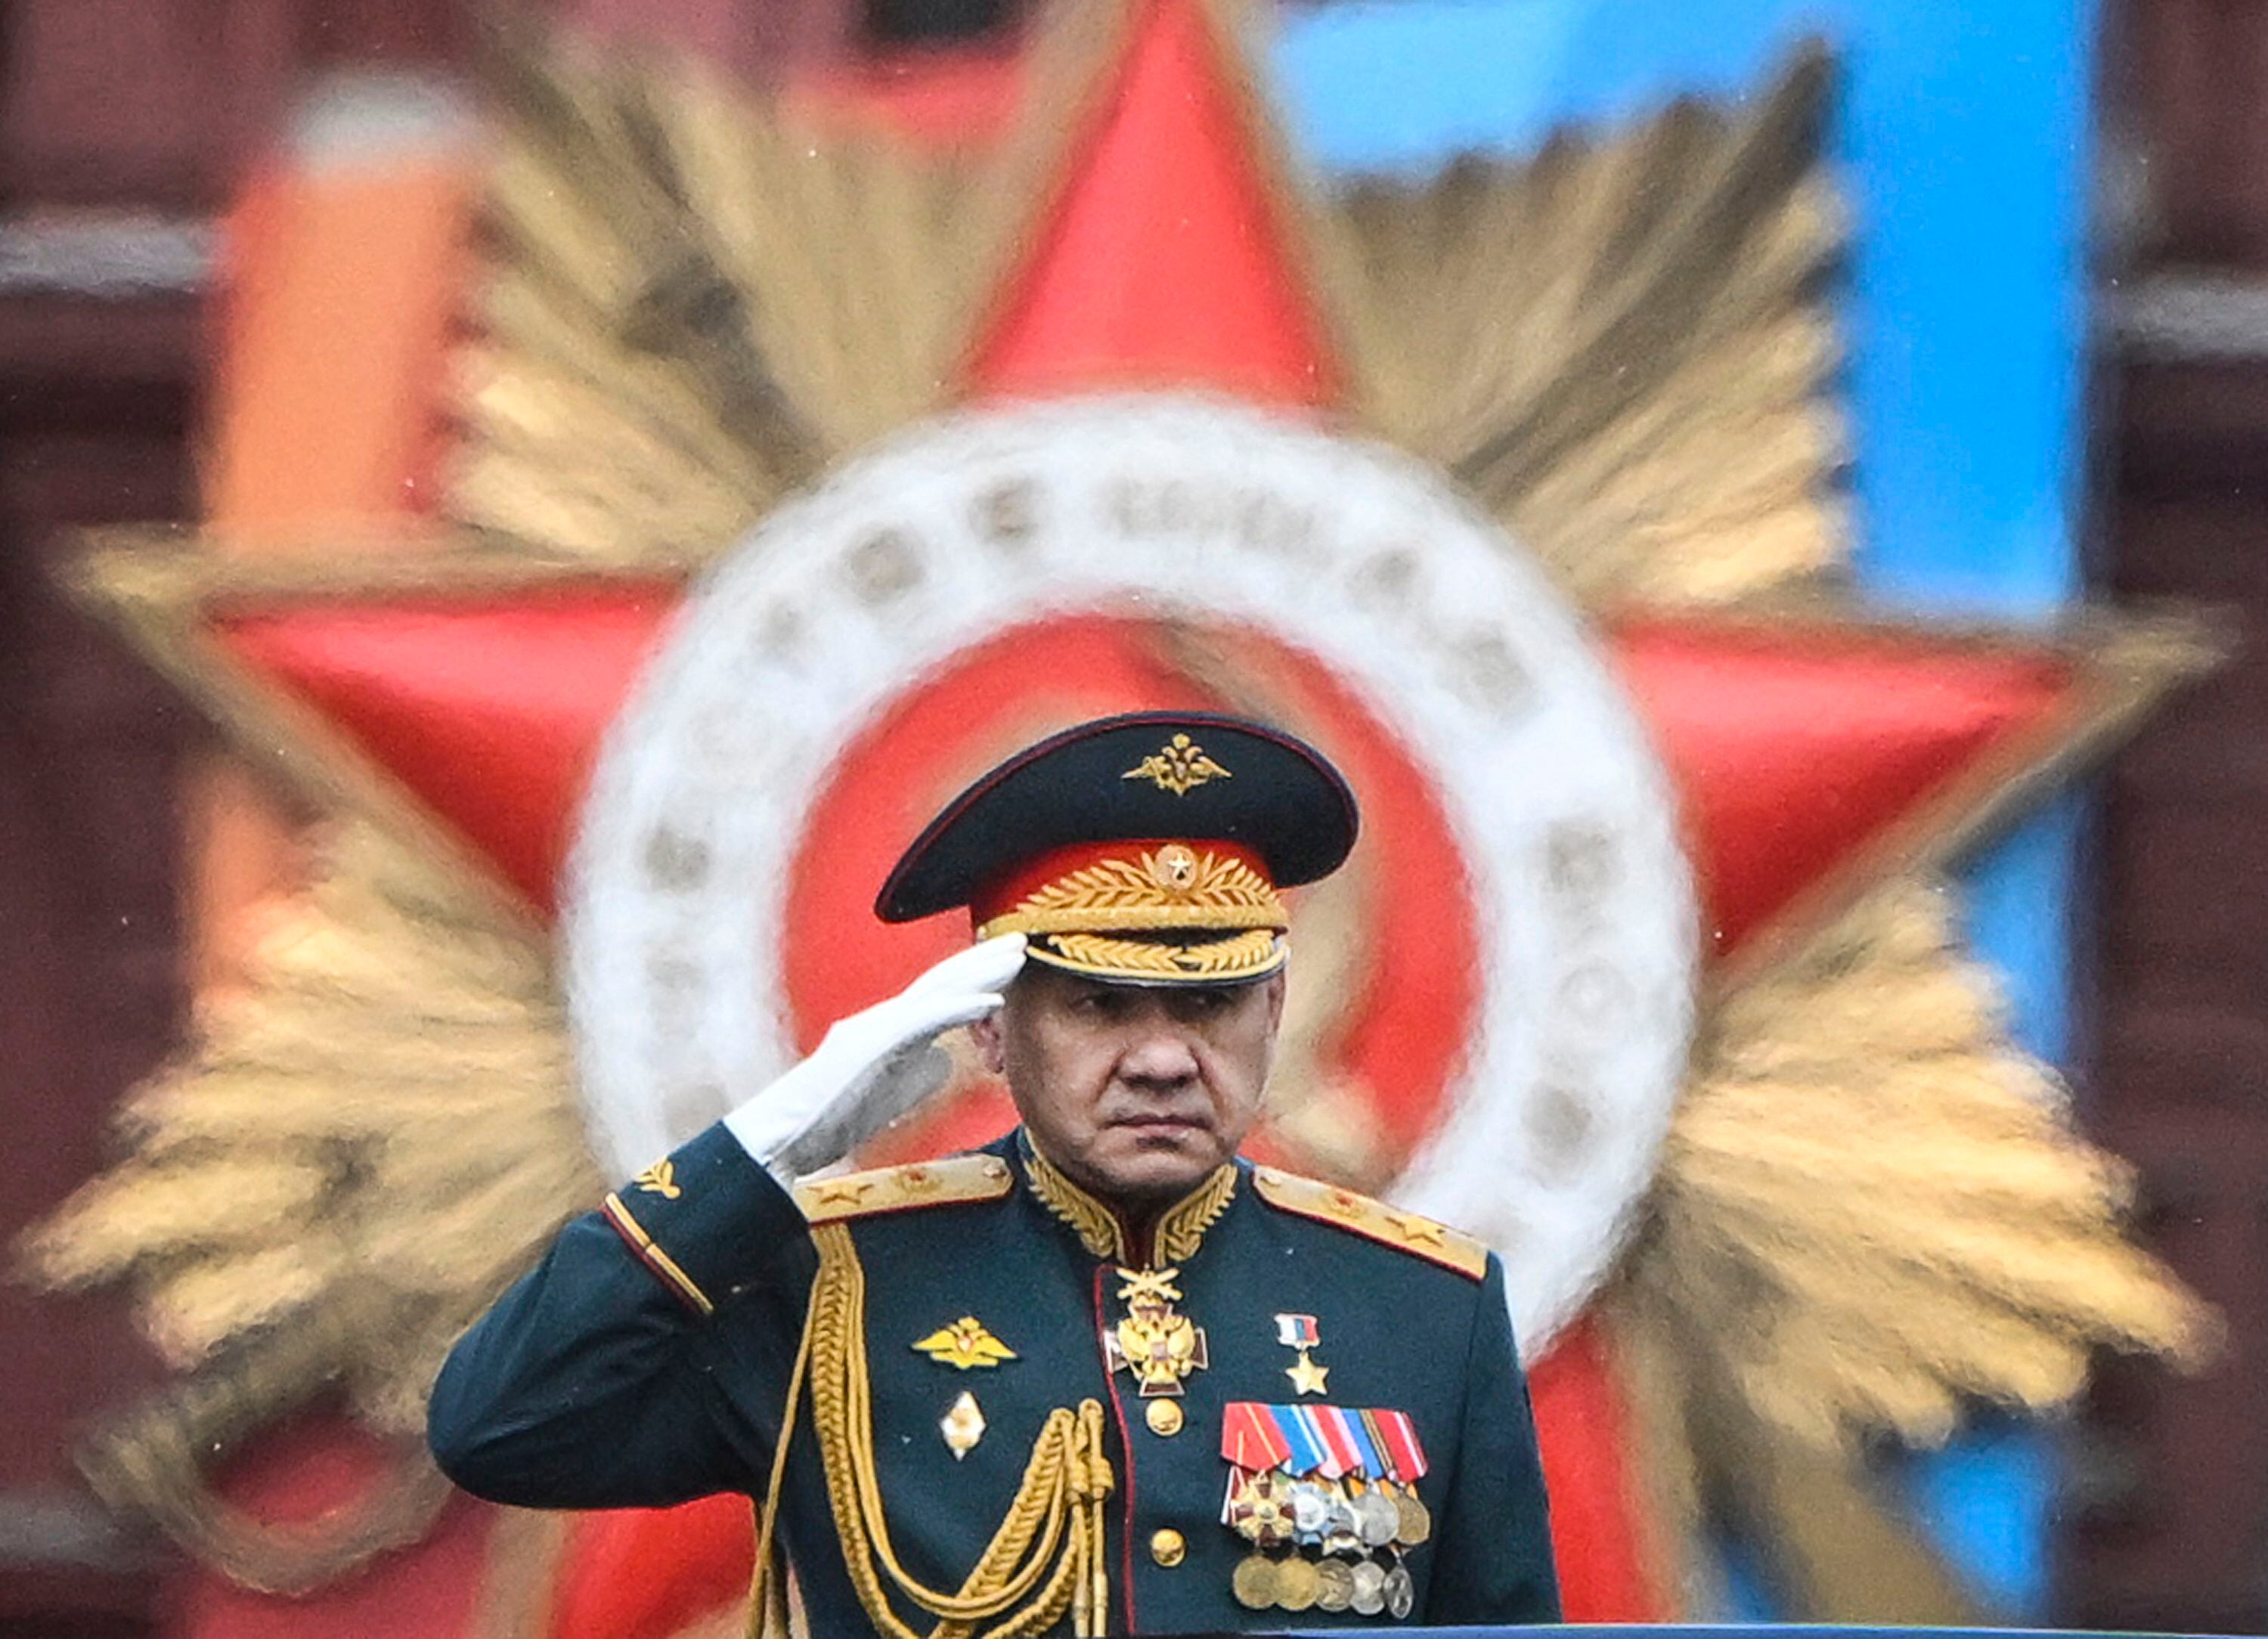 Russian Defense Minister Sergei Shoigu salutes soldiers as they lead him through Red Square during the Victory Day military parade in central Moscow on May 9, 2024. (Photo by Alexander NEMENOV/AFP).